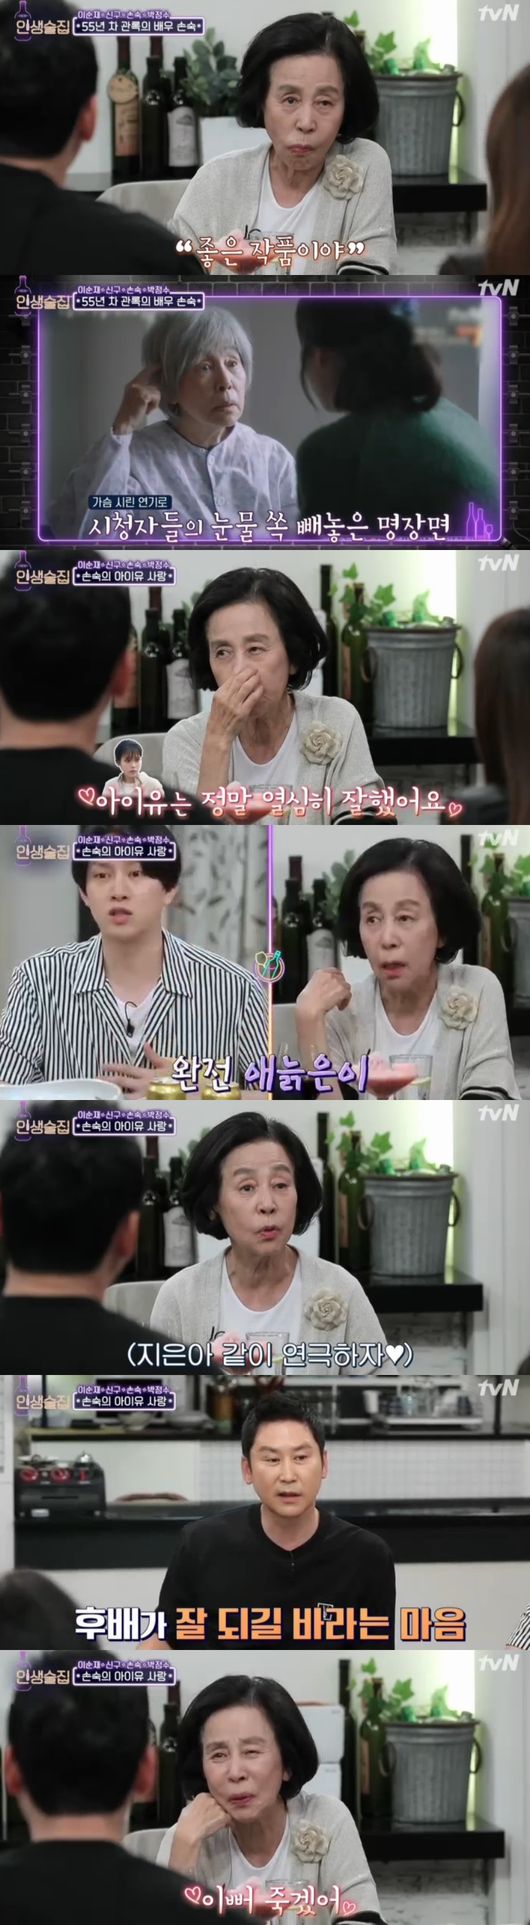 Actor Son Sook praised the IUs Acting, which was breathed together in the drama The Man from Nowhere.Lee Soon-jae, Shin Gu, Son Sook, and Park Jung-soo appeared as the special feature of Actor of the Numsa Wall legend in TVN entertainment Life Bar broadcast on the 13th.Shin Gu, a drunken enthusiast, Lee Soon-jae, and Son Sook and Park Jung-soo appeared together as a life bar.At this time, he summoned the flower-grass Memory of Shin Gu and Lee Soon-jae, saying that Lee Soon-jae had proposed to Shin Gu; the schedule was just right and left.It was a topic of conversation because it was a trip of new concept people who made the world buzz. The two people said, It was a big study because I was curious about the difficult trip, I wanted to see this opportunity.Park Jung-soo mentioned his son Kim Kyung-ho, Life On Mars, a drama with his son as an Acting senior; and appeared in a cameo in the final episode at the request of his son.Park Jung-soo said, It was a good memory with my son. I do not give any advice on Acting, I only praise it when I do well.The most memorable piece was LA Arirang. Every two months, he said that he actually shot all the outdoor shooting in LA, and told the behind-the-scenes story.In addition, because of the actual American drama motif, I was able to act in front of the audience, so I heard a real laugh with 100 pros. Park Jung-soo recalled that it was a work that enjoyed breathing with the audience.I got pictures of my beauty. I was popular during my school days, so I received a lot of love notes from boys.Lee Soon-jae, who was named Whats Love? was the first Korean hit in the drama to fart.He was surprised that he was not able to appear on the show when he was divorced, as well as not being divorced in the drama.Lee Soon-jae, who earned the nickname of Yadong Soon-jae, also said, I did not do it at first, I have face.However, unlike the concern, he received a lot of love and showed an old actor who fits the flow of the times.Shin Gu said, I can not stop them in the Waman Sea and the drama Do it your way which showed the love of fatherhood.Shin Gu recalled that he was an aspiring announcer and thought about the announcer in the midst of his career after entering the army.But he said that his career was not easy because of the job he had not been treated at the time.Shin Gu was proud to be a blessing to work so far than money and honor. Shin Gu said, I only know how to do it.Son Sook cited the work The Man from Nowhere: he learned all the sign language himself.IU also showed perfect sign language, Son Sook said. I am really good at Acting, a special friend with concentration commitment, a completely old man.In addition, he said, I would like to try it. He said that playing will deepen his acting, and he showed affection for recommending good works.Son Sook continued to show special affection, saying, IU is pretty and I will die.Life Bar broadcast screen capture